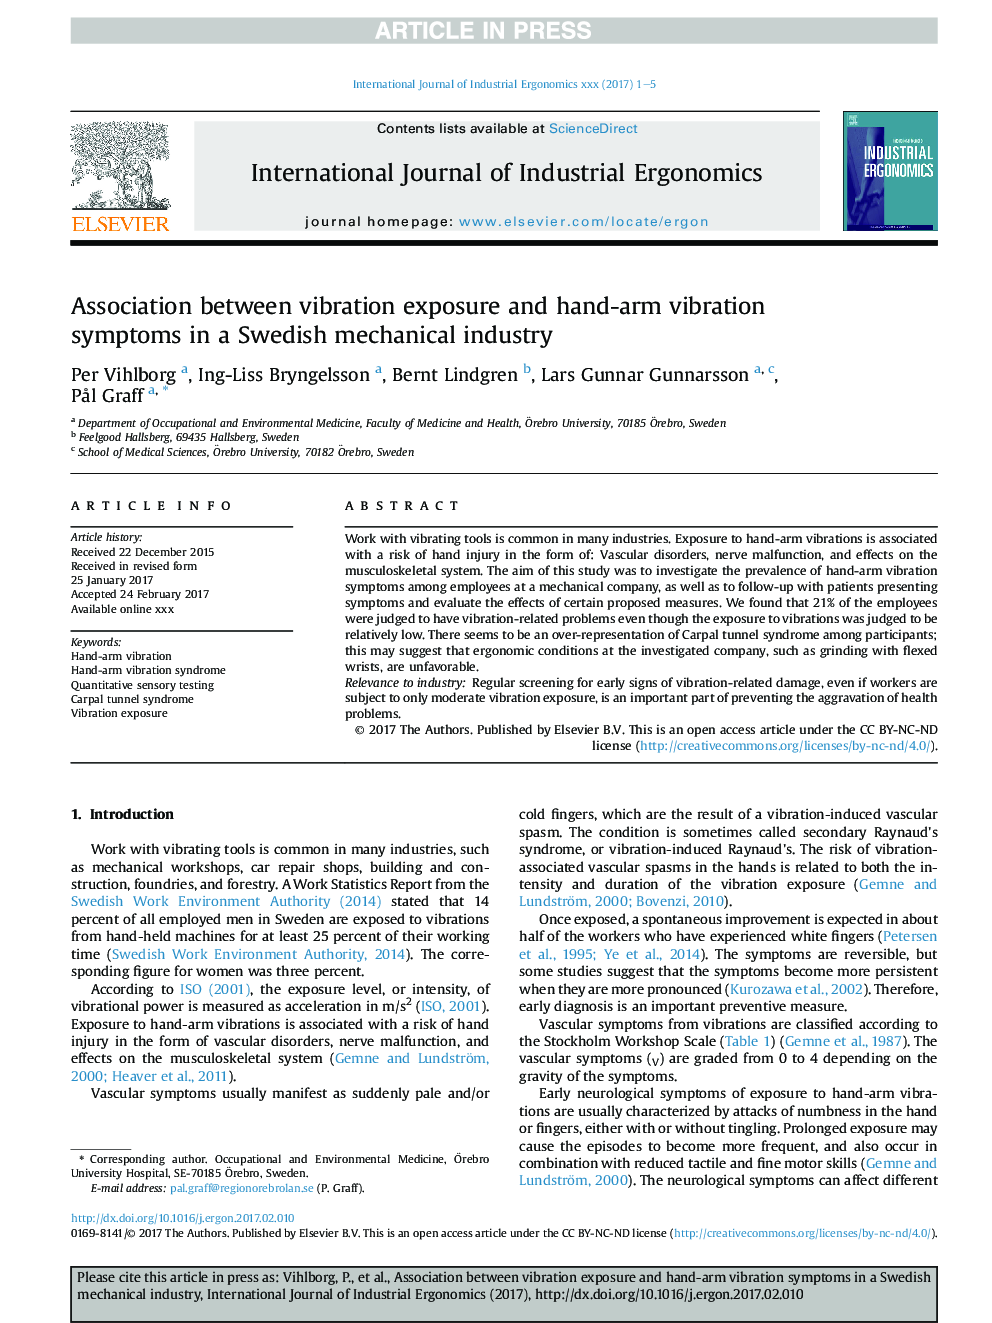 Association between vibration exposure and hand-arm vibration symptoms in a Swedish mechanical industry